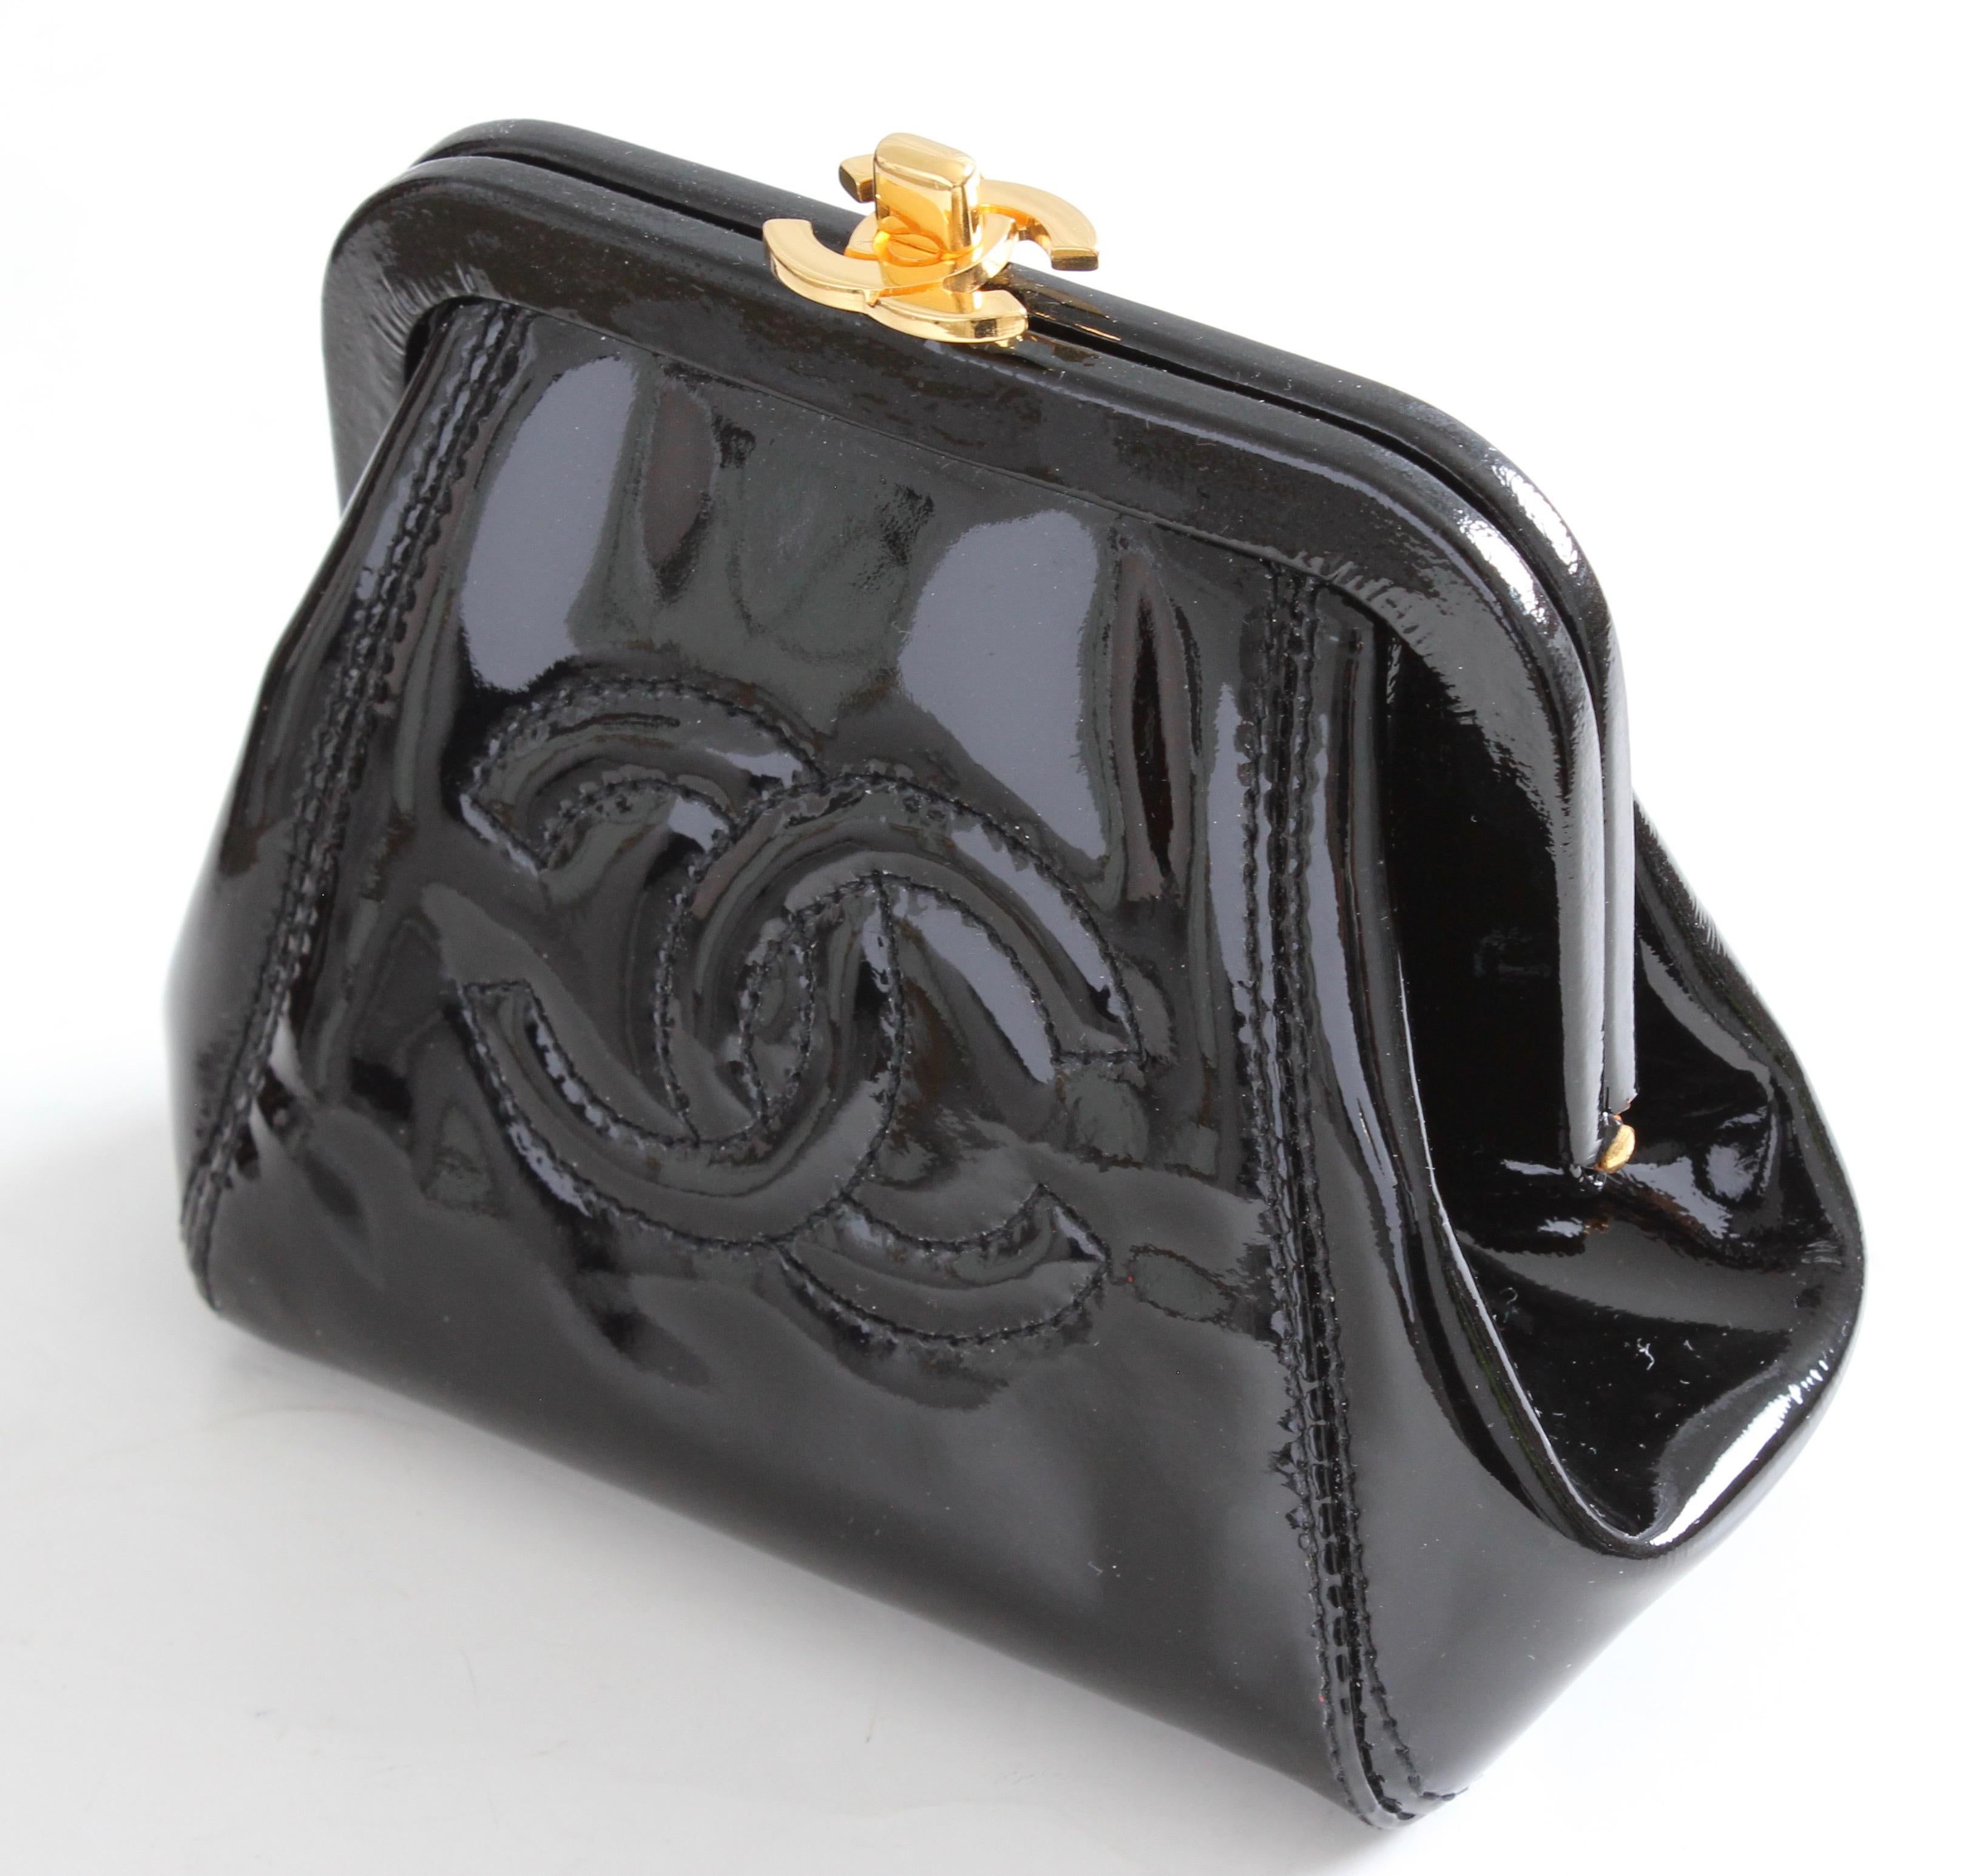 Here's a pretty little patent leather coin purse or small clutch from Chanel, made in 1996.  Made from black patent leather, it features a CC logo in front and a gold CC logo fastener on top.  The interior is lined in grosgrain with one small